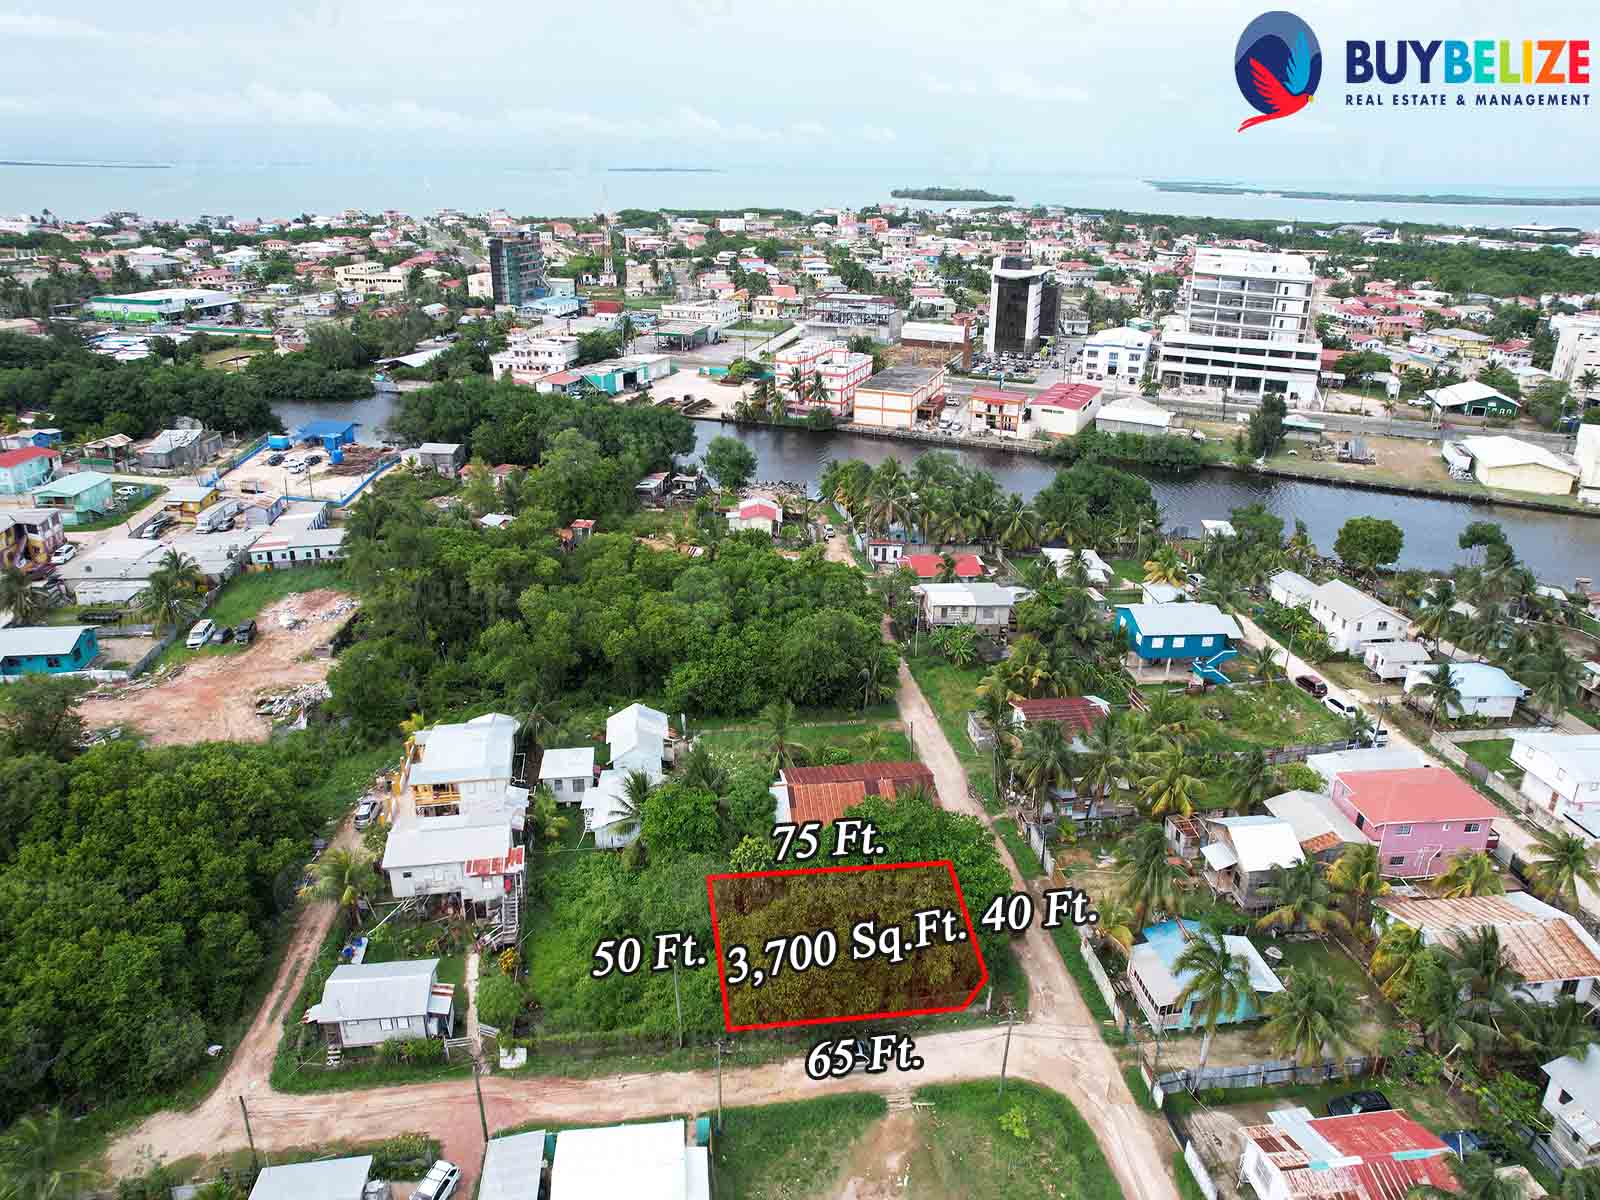 3,700 Sq.Ft Corner Land for Sale in Belize City, in the Developing area of Lake Independence.